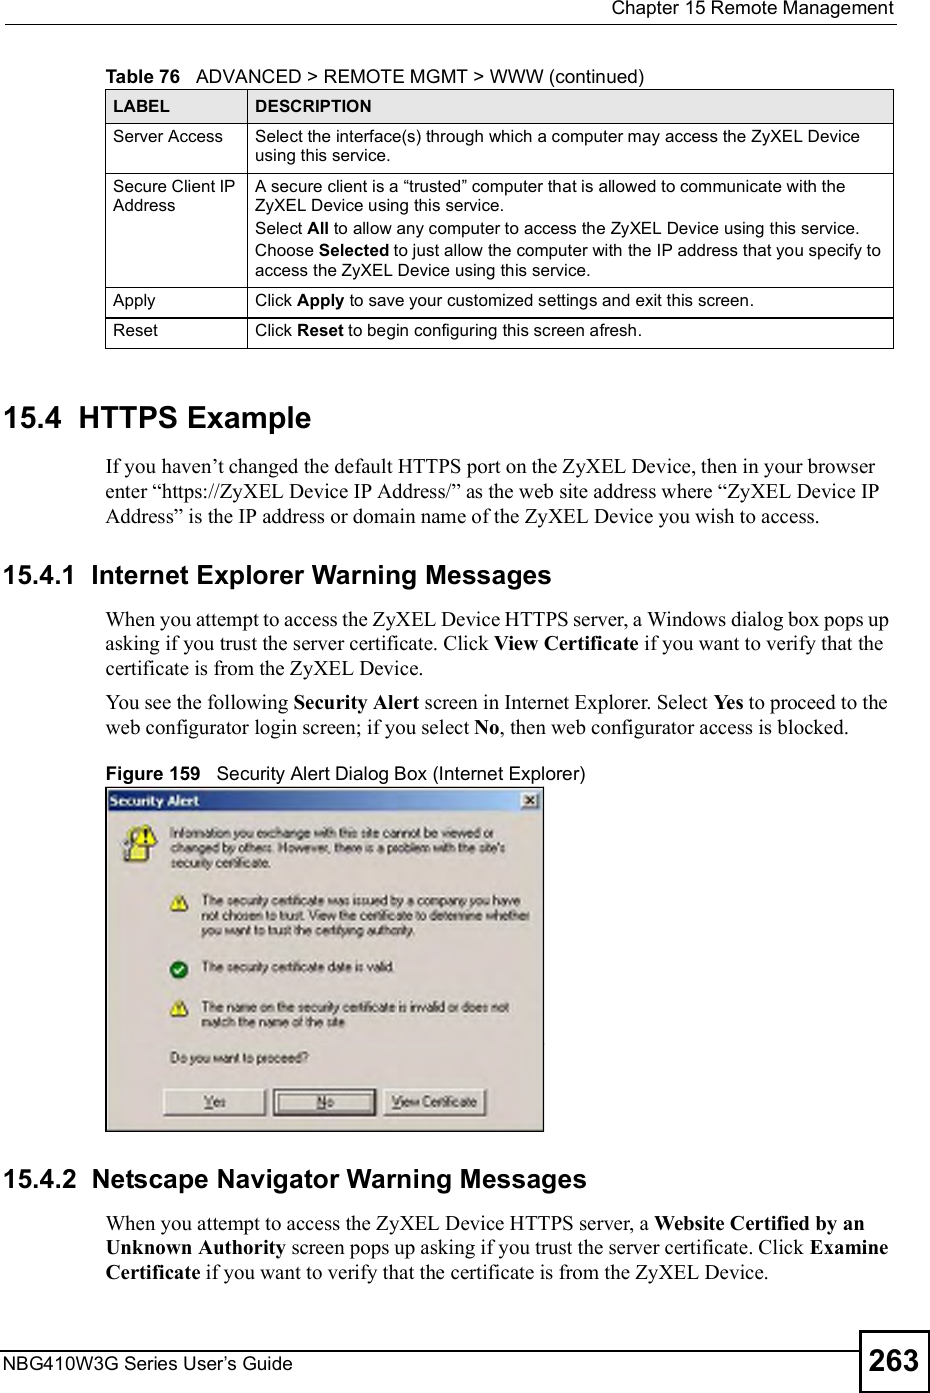  Chapter 15Remote ManagementNBG410W3G Series User s Guide 26315.4  HTTPS ExampleIf you haven!t changed the default HTTPS port on the ZyXEL Device, then in your browser enter &quot;https://ZyXEL Device IP Address/# as the web site address where &quot;ZyXEL Device IP Address# is the IP address or domain name of the ZyXEL Device you wish to access.15.4.1  Internet Explorer Warning MessagesWhen you attempt to access the ZyXEL Device HTTPS server, a Windows dialog box pops up asking if you trust the server certificate. Click View Certificate if you want to verify that the certificate is from the ZyXEL Device. You see the following Security Alert screen in Internet Explorer. Select Yes to proceed to the web configurator login screen; if you select No, then web configurator access is blocked.Figure 159   Security Alert Dialog Box (Internet Explorer)15.4.2  Netscape Navigator Warning MessagesWhen you attempt to access the ZyXEL Device HTTPS server, a Website Certified by an Unknown Authority screen pops up asking if you trust the server certificate. Click Examine Certificate if you want to verify that the certificate is from the ZyXEL Device.Server Access Select the interface(s) through which a computer may access the ZyXEL Device using this service.Secure Client IP AddressA secure client is a &quot;trusted# computer that is allowed to communicate with the ZyXEL Device using this service. Select All to allow any computer to access the ZyXEL Device using this service.Choose Selected to just allow the computer with the IP address that you specify to access the ZyXEL Device using this service.Apply Click Apply to save your customized settings and exit this screen. Reset Click Reset to begin configuring this screen afresh.Table 76   ADVANCED &gt; REMOTE MGMT &gt; WWW (continued)LABEL DESCRIPTION